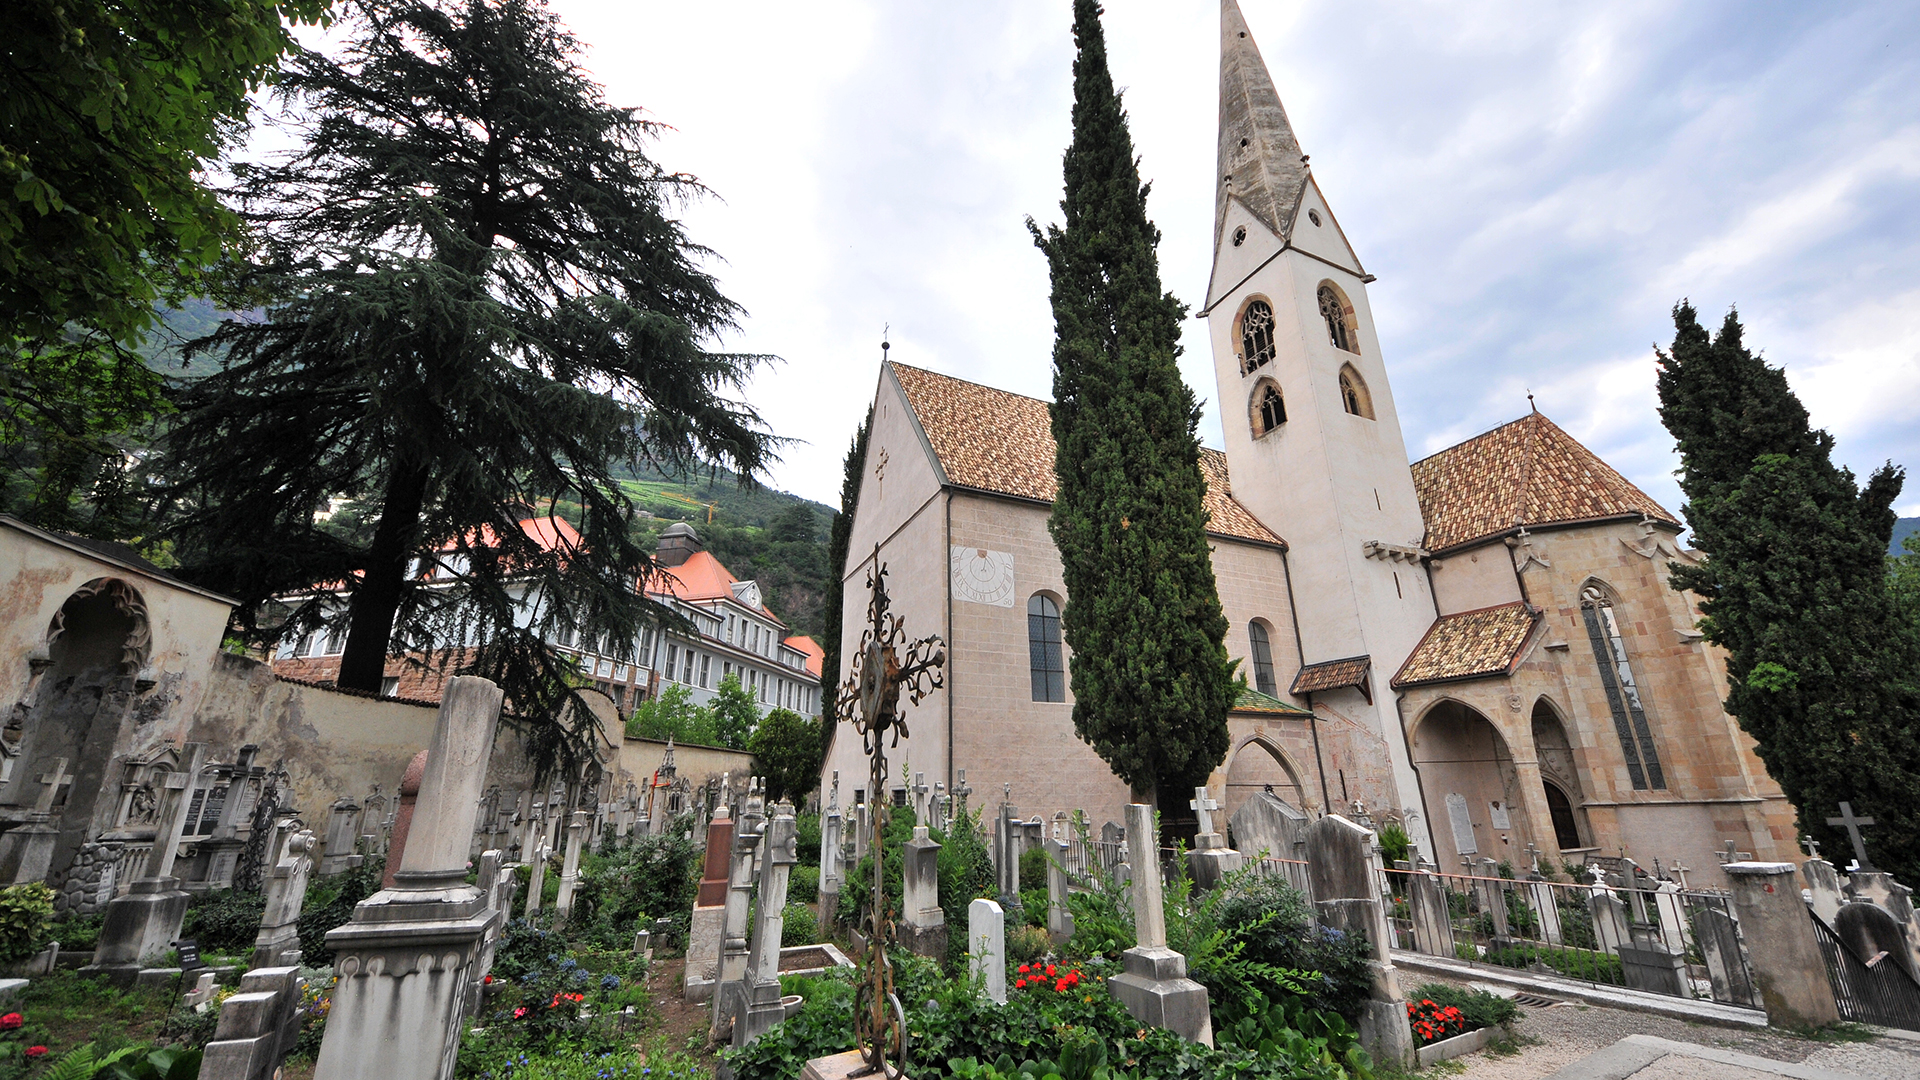 Bolzano's cemetery is a place of high culture and tradition that tells the story of the city's history and events.